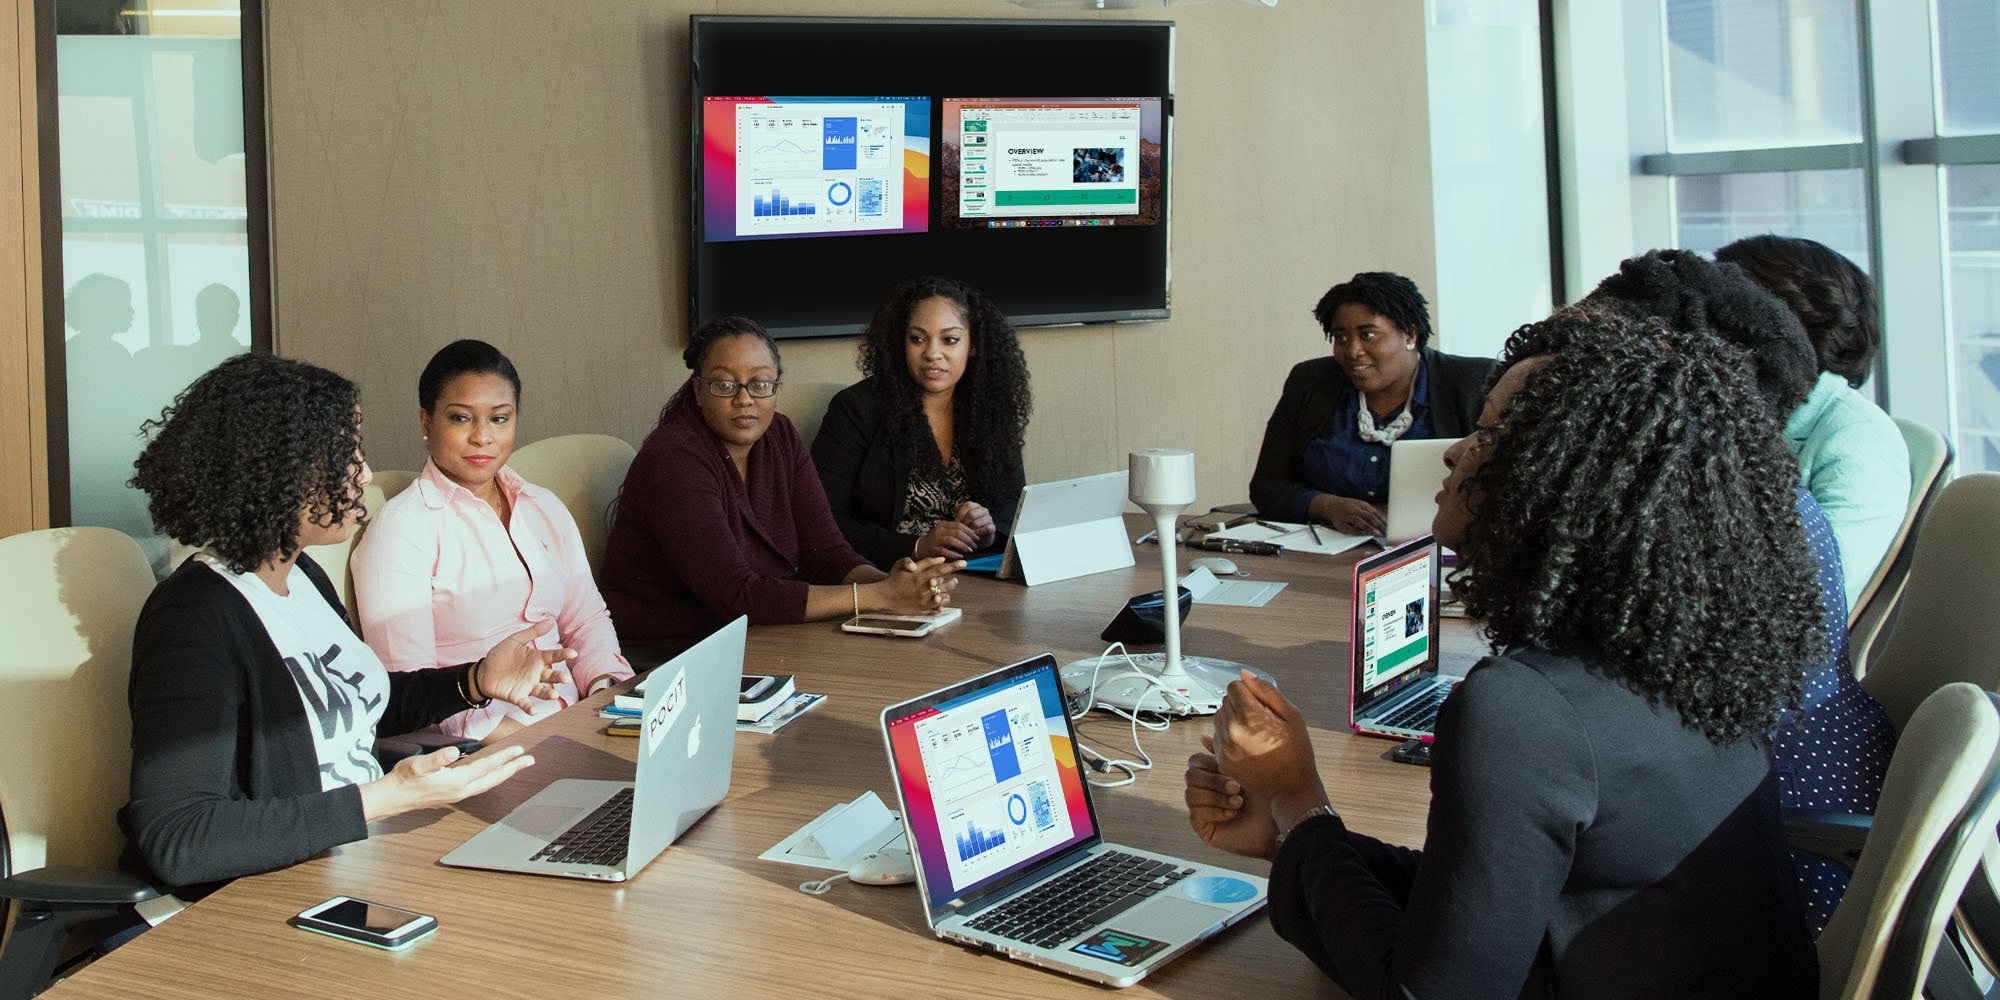 People meeting in a conference room while sharing wirelessly from two computers to a large TV screen